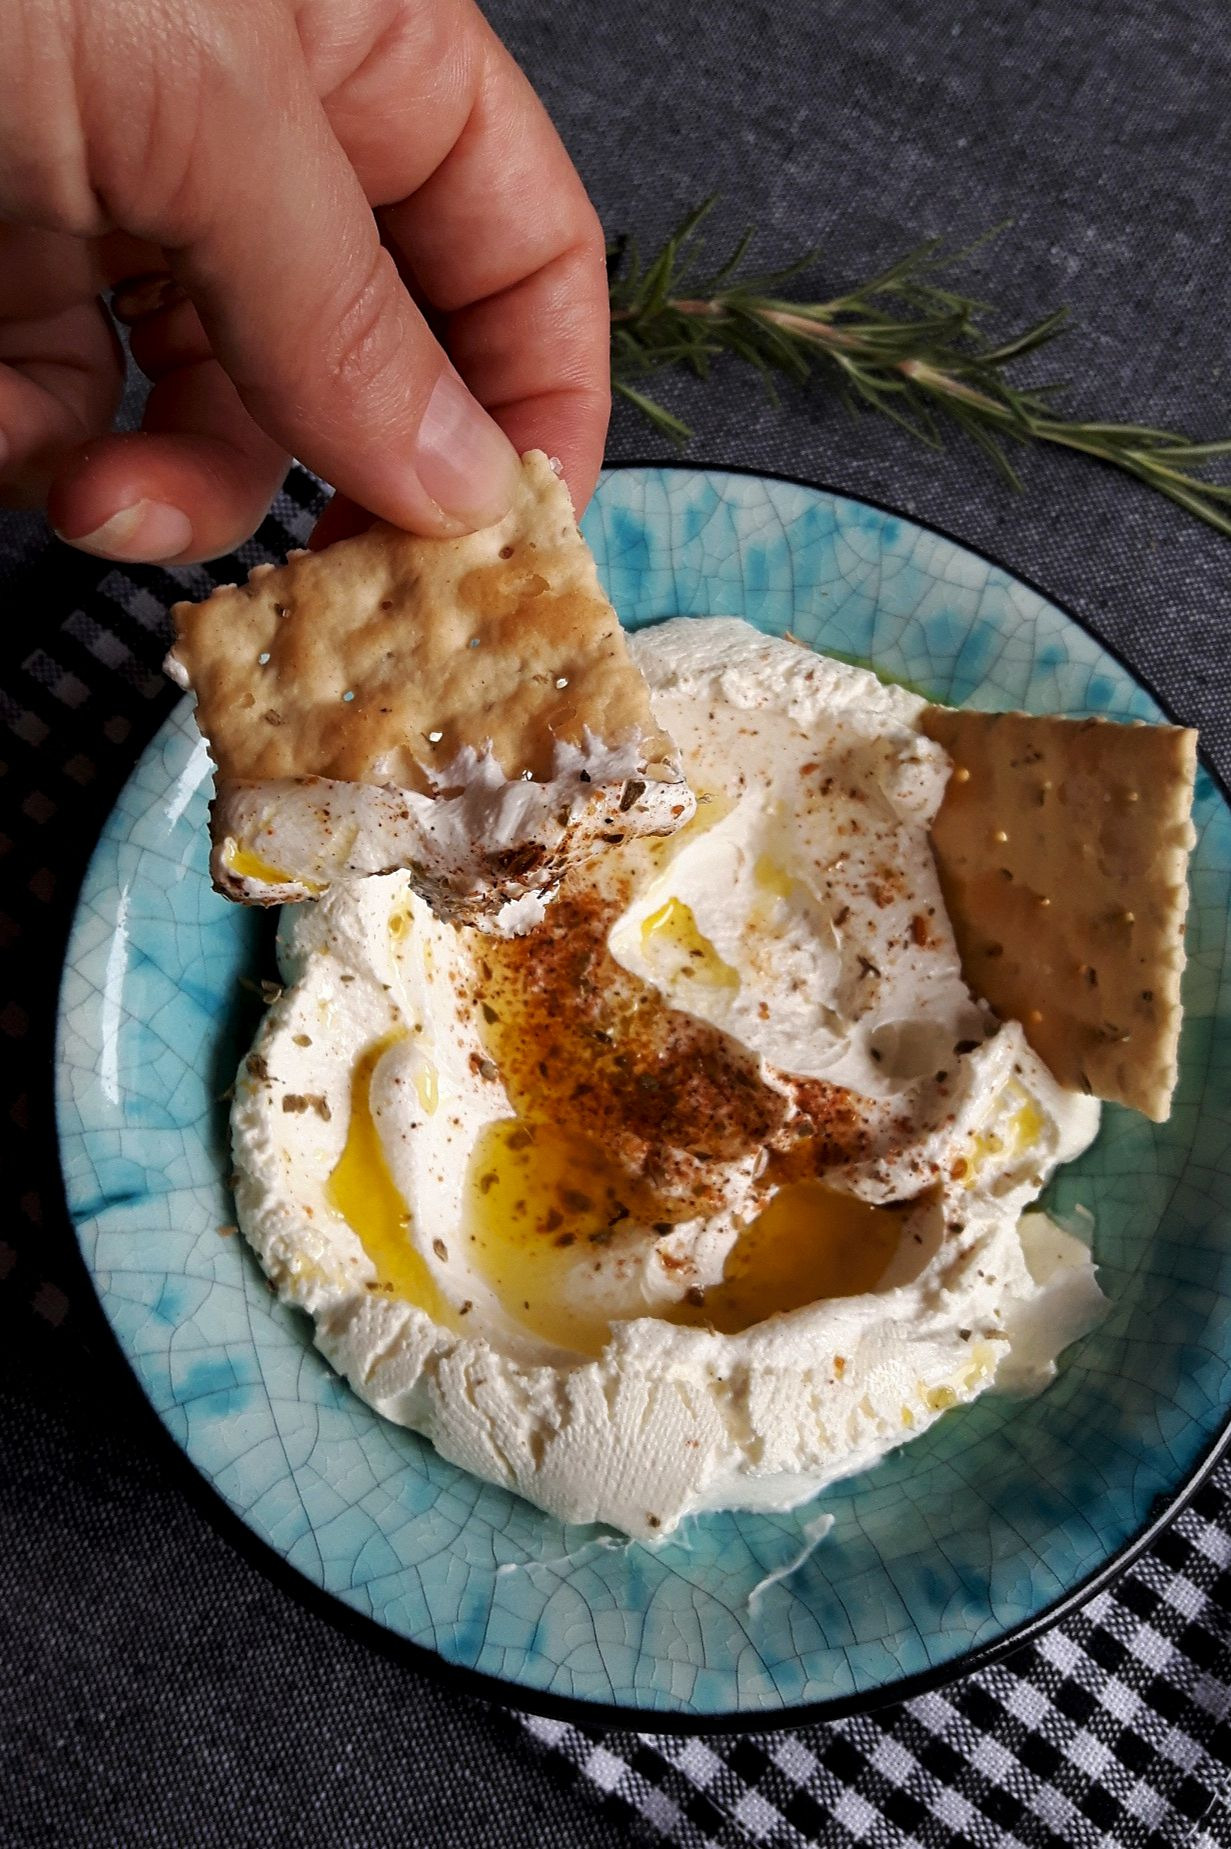 labneh-the-oriental-yogurt-cheese-has-a-place-in-my-transylvanian-kitchen